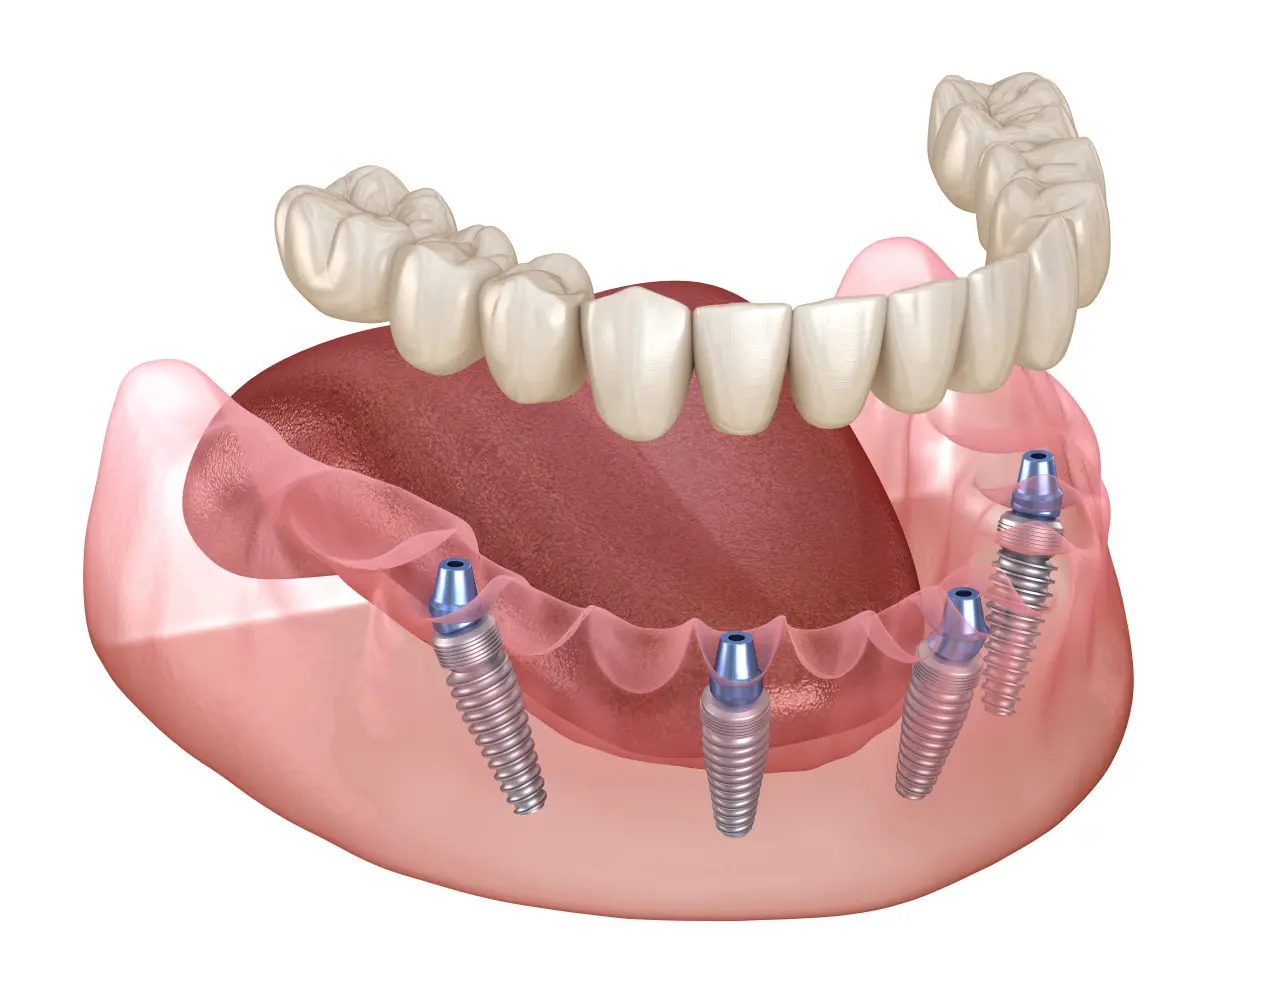 What are All on 4 Dental Implants? Treatment Procedure, Costs and More